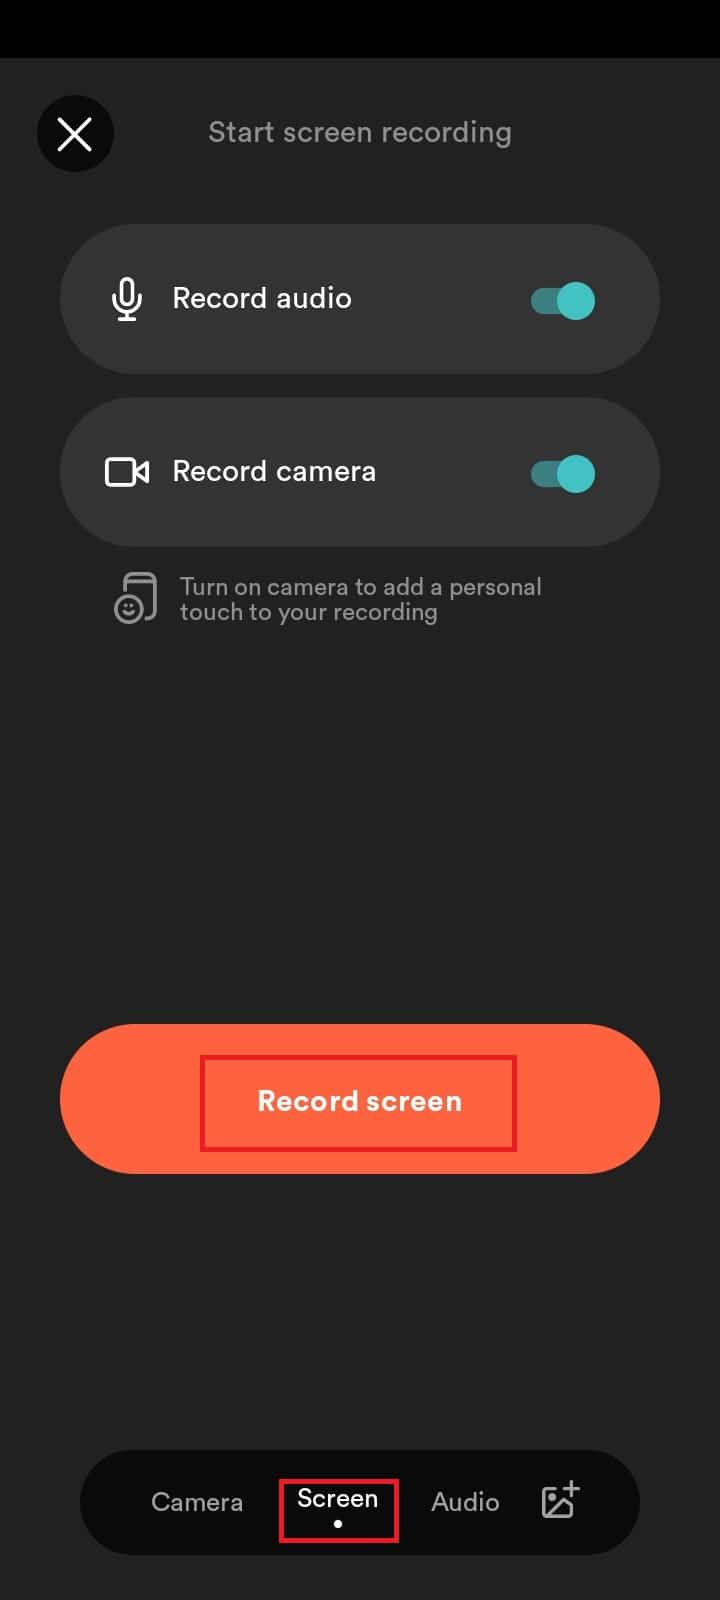 Tap on record screen button